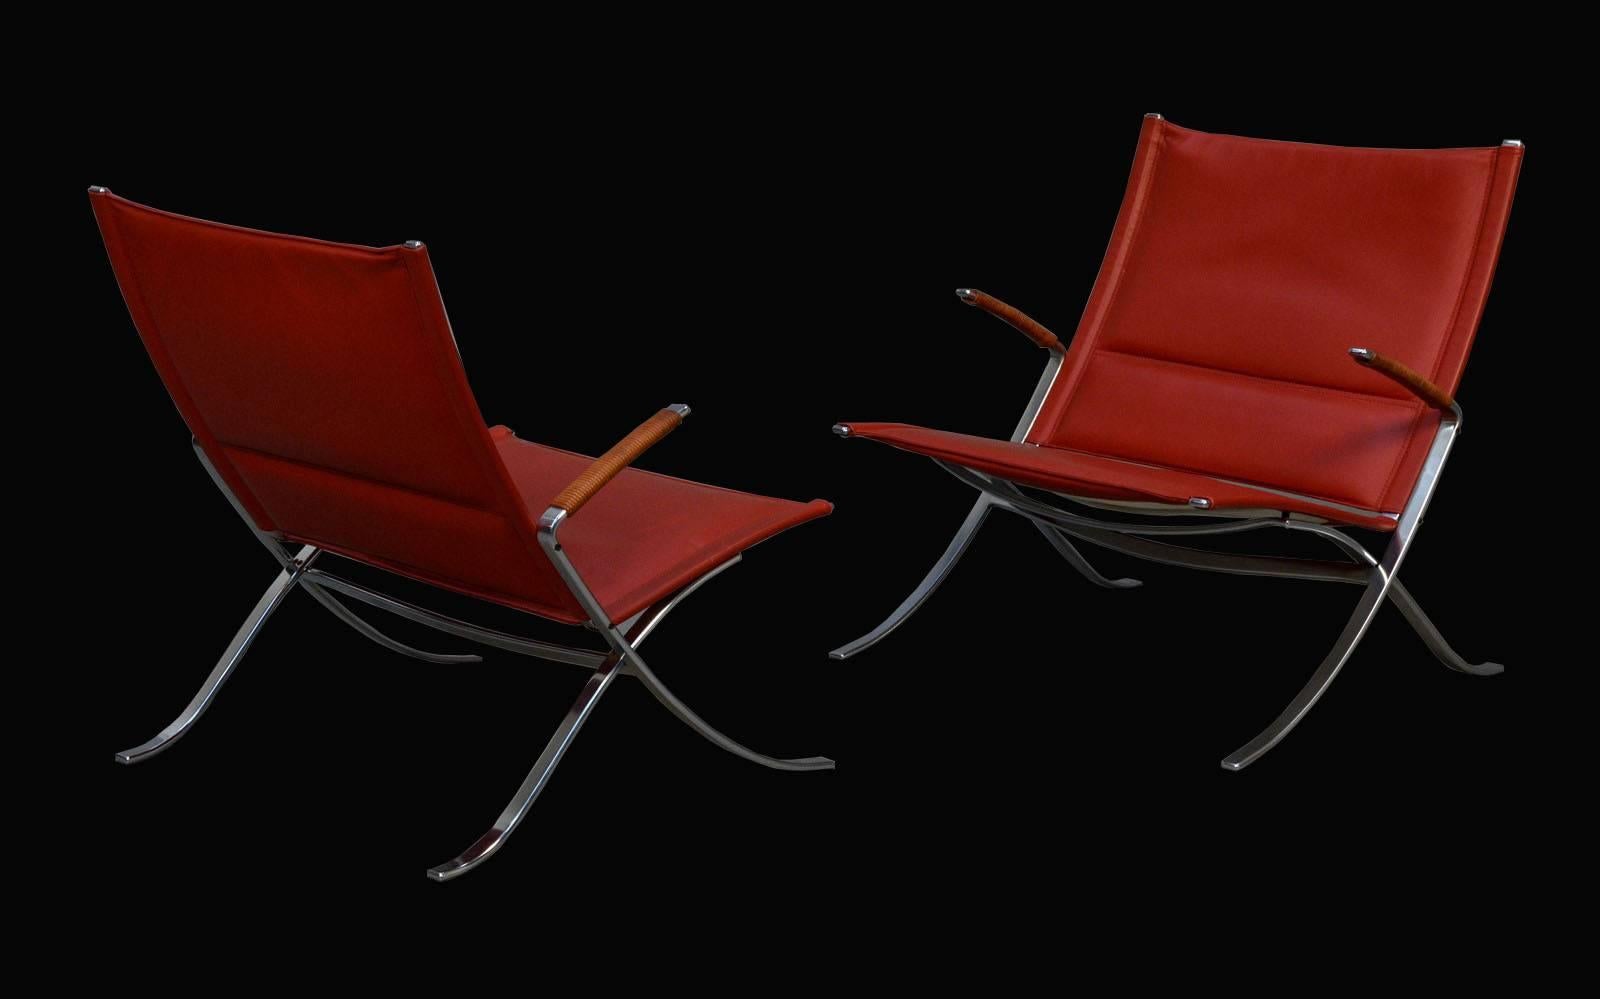 A stunning original first edition pair of X-chairs by Jorgen Kastholm & Preben Fabricius for Alfred Kill in steel and oxblood leather.